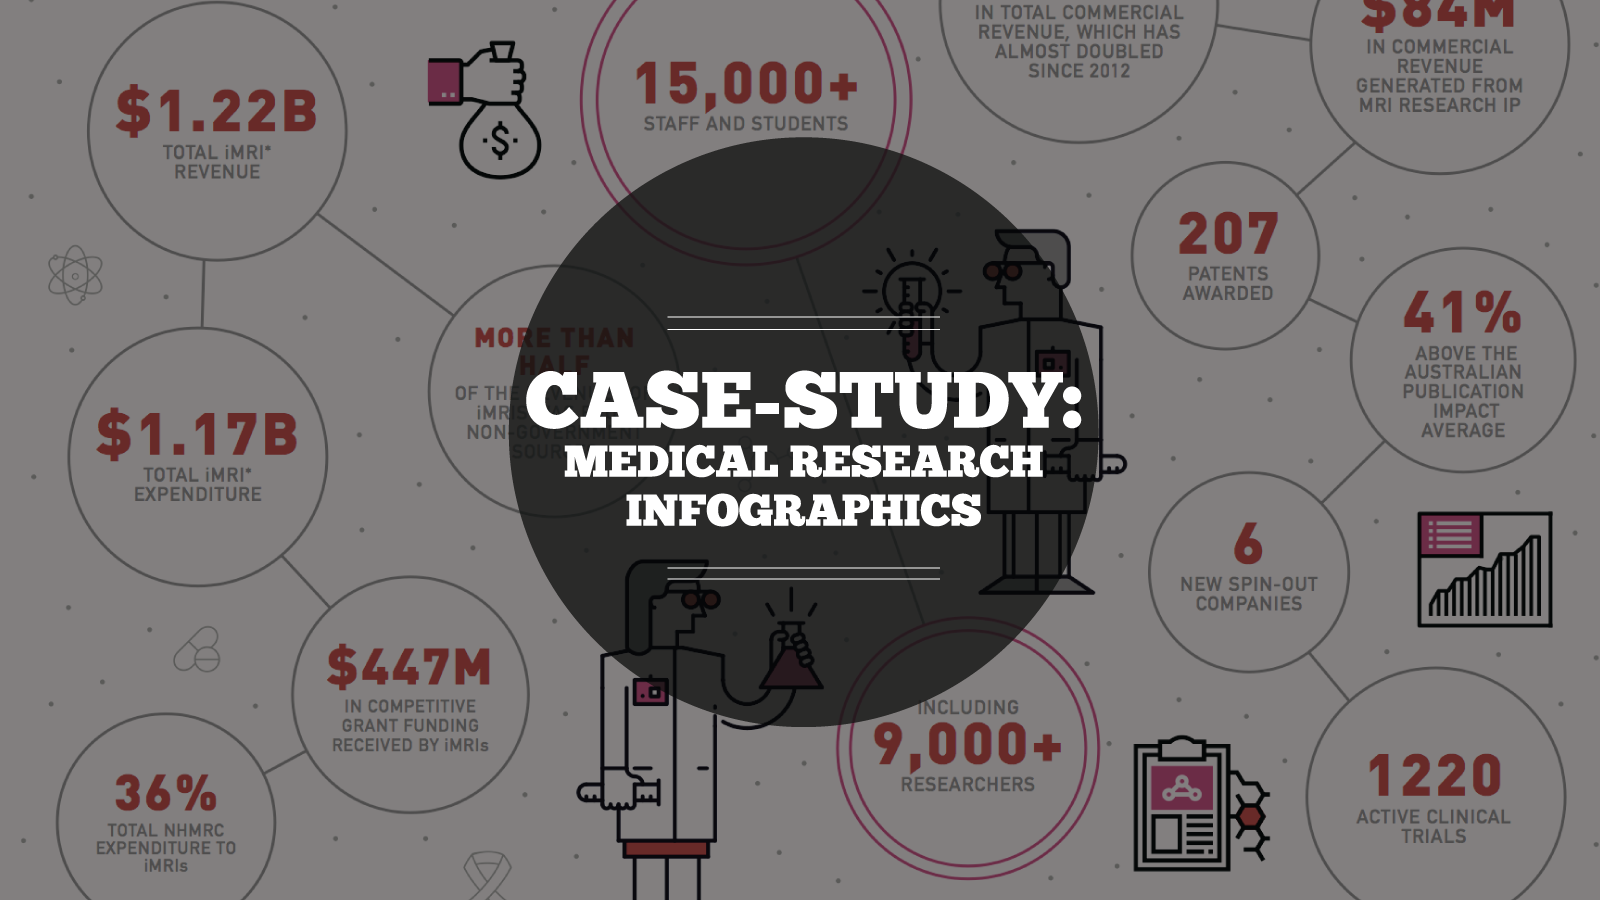 Case-study: Medical Research Infographic